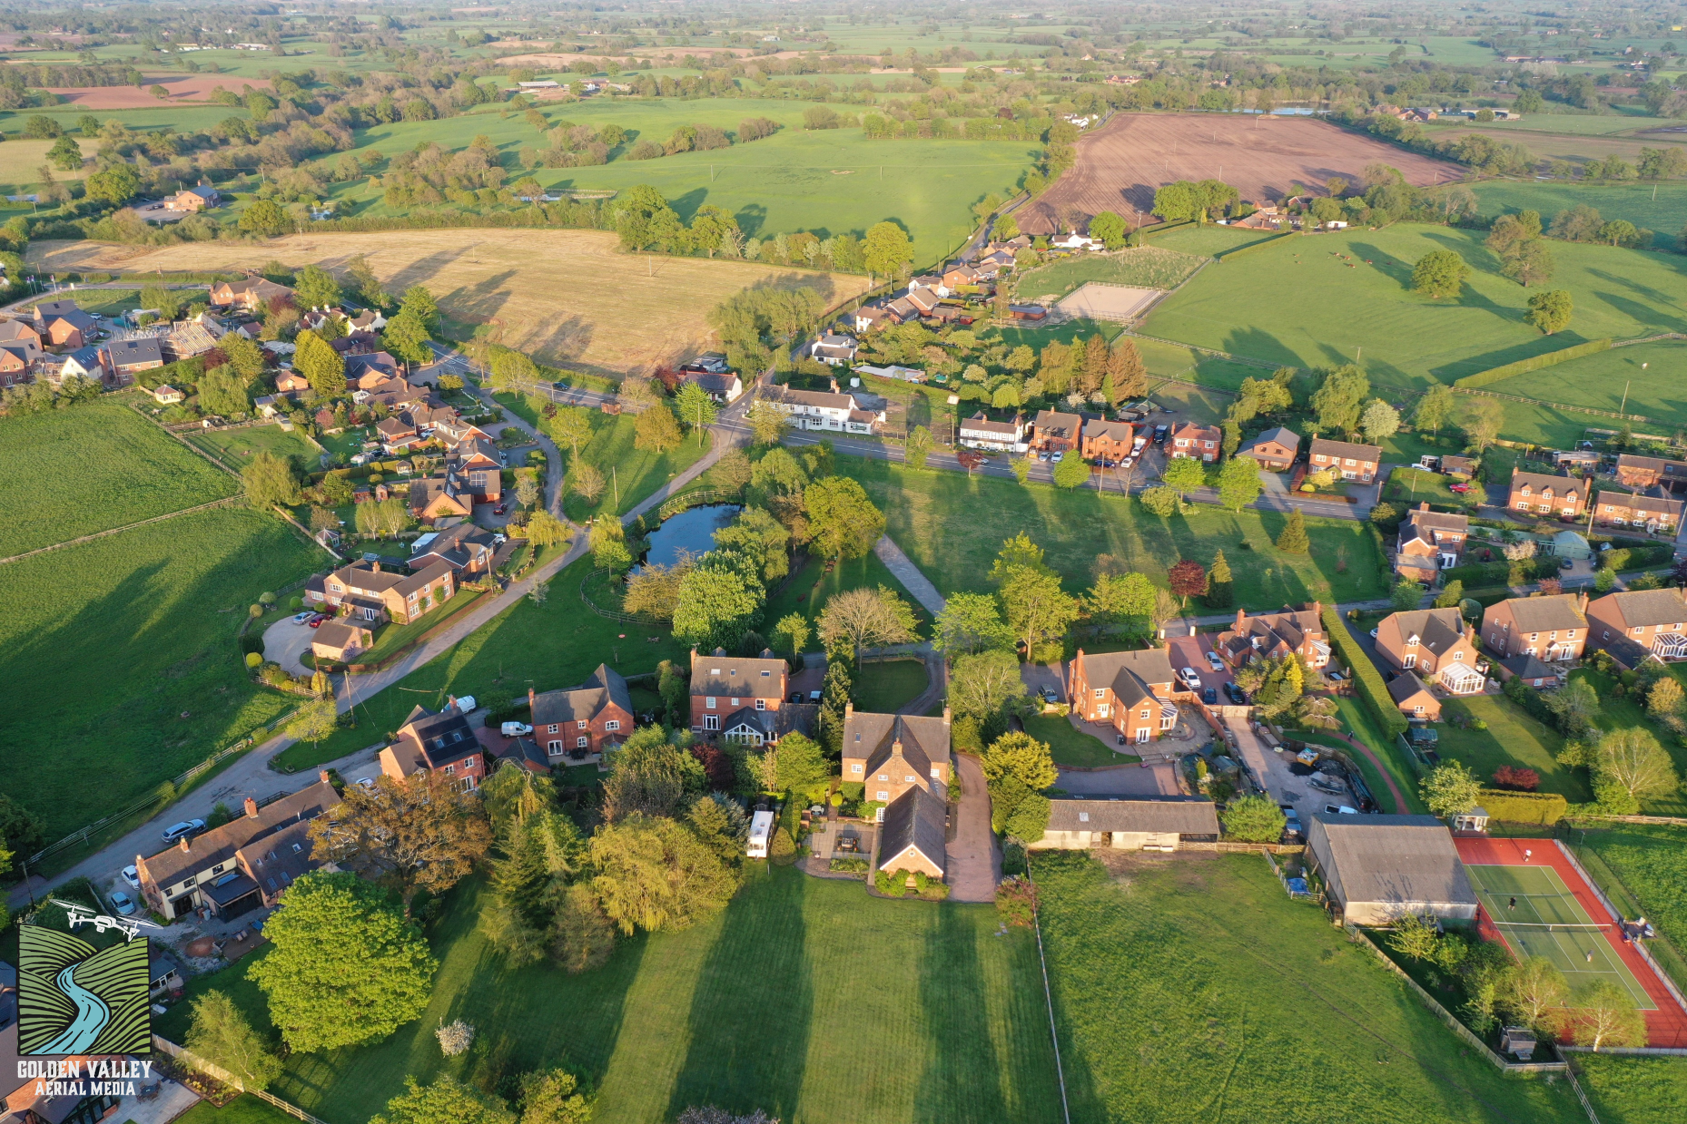 An aerial photograph of the village taken in April 2019 - image © Golden Valley Aerial Media